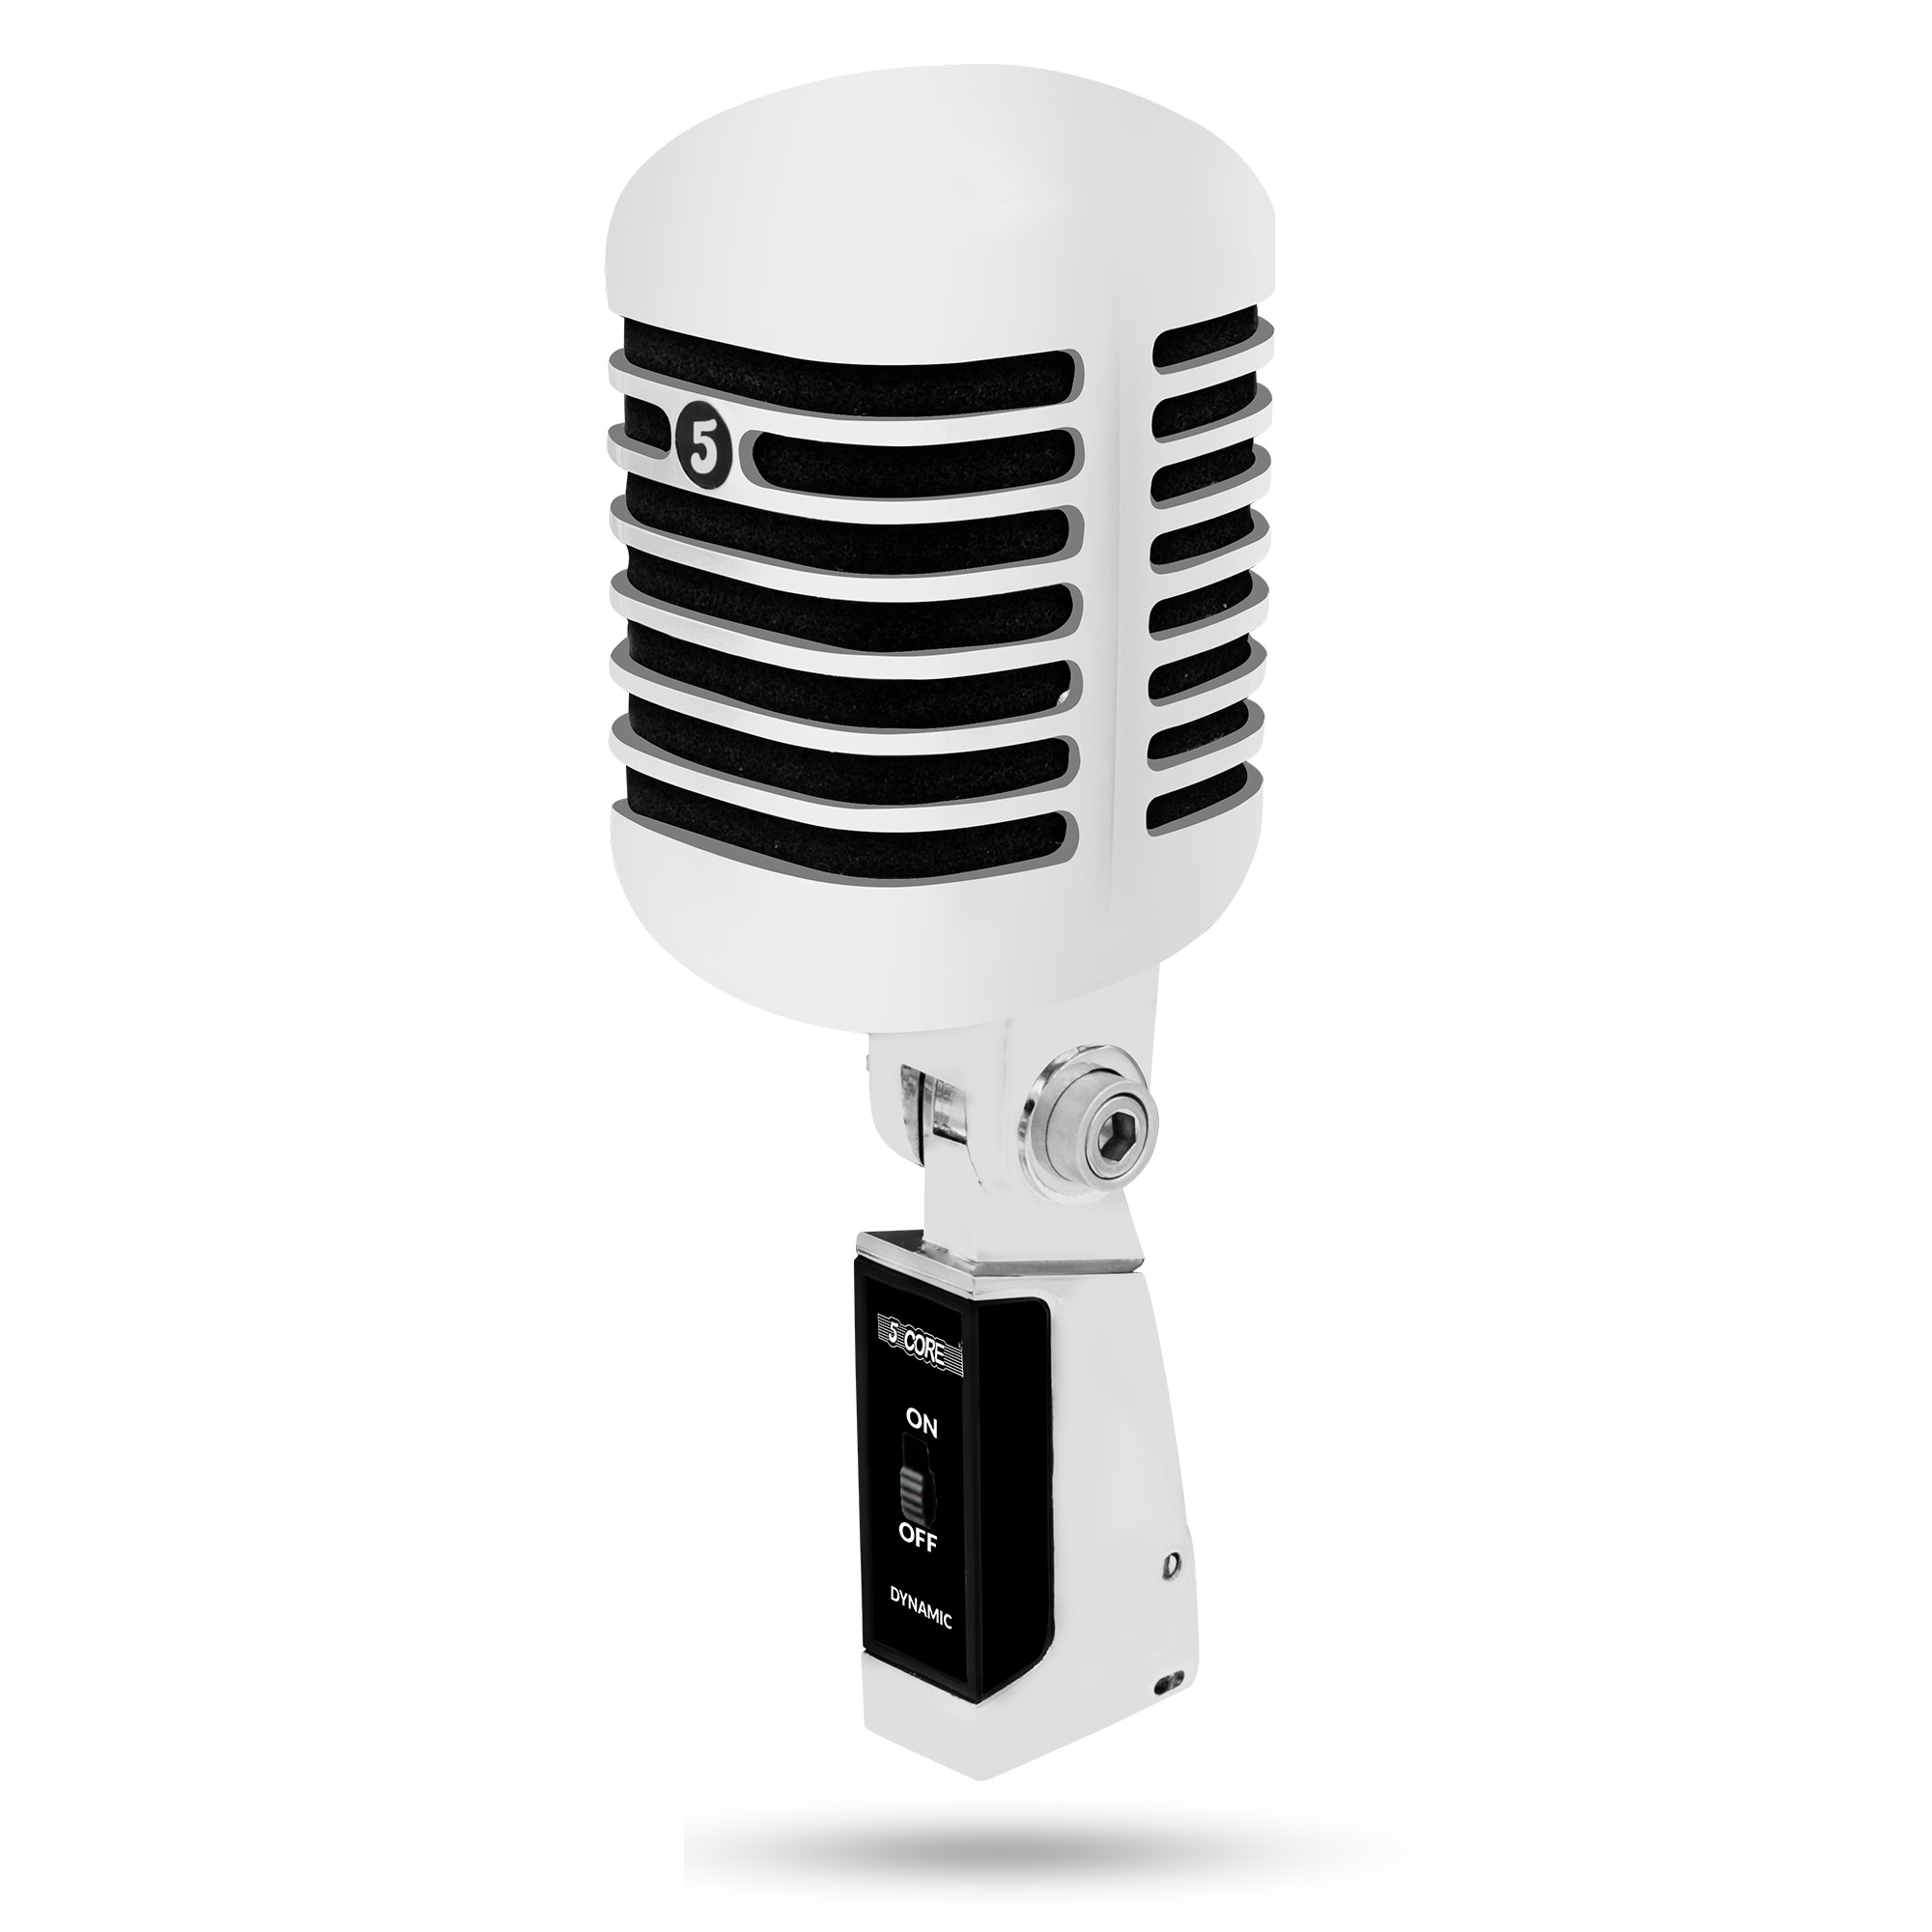 The model is RTRO MIC CH BLK